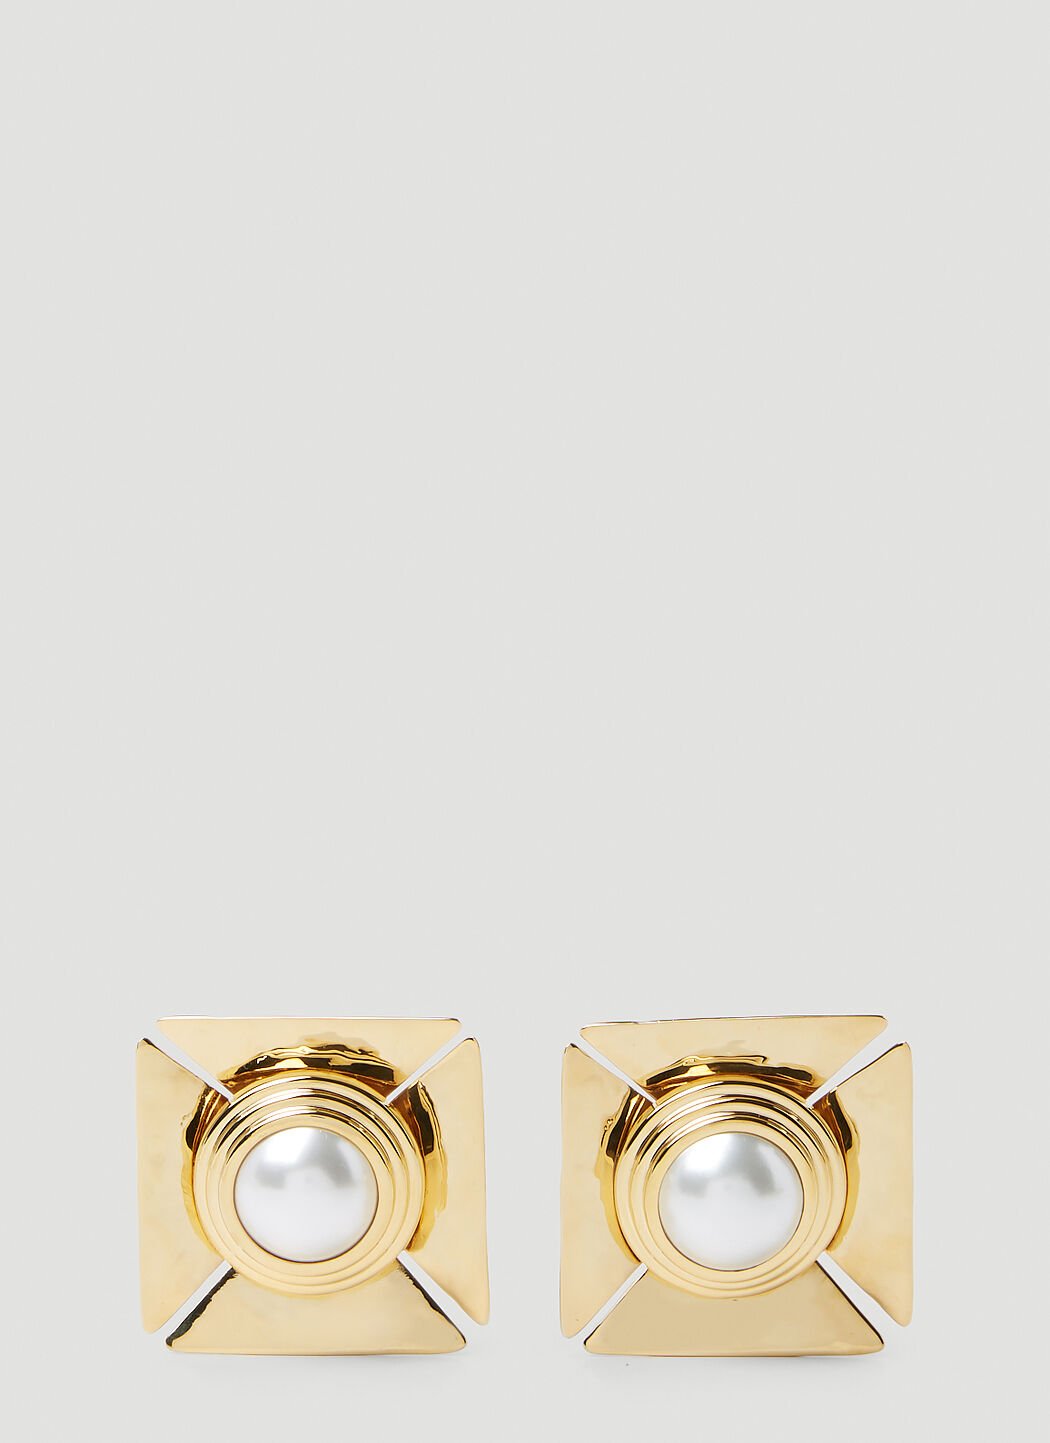 Gallery Dept. Pearl Square Earrings Olive gdp0150042